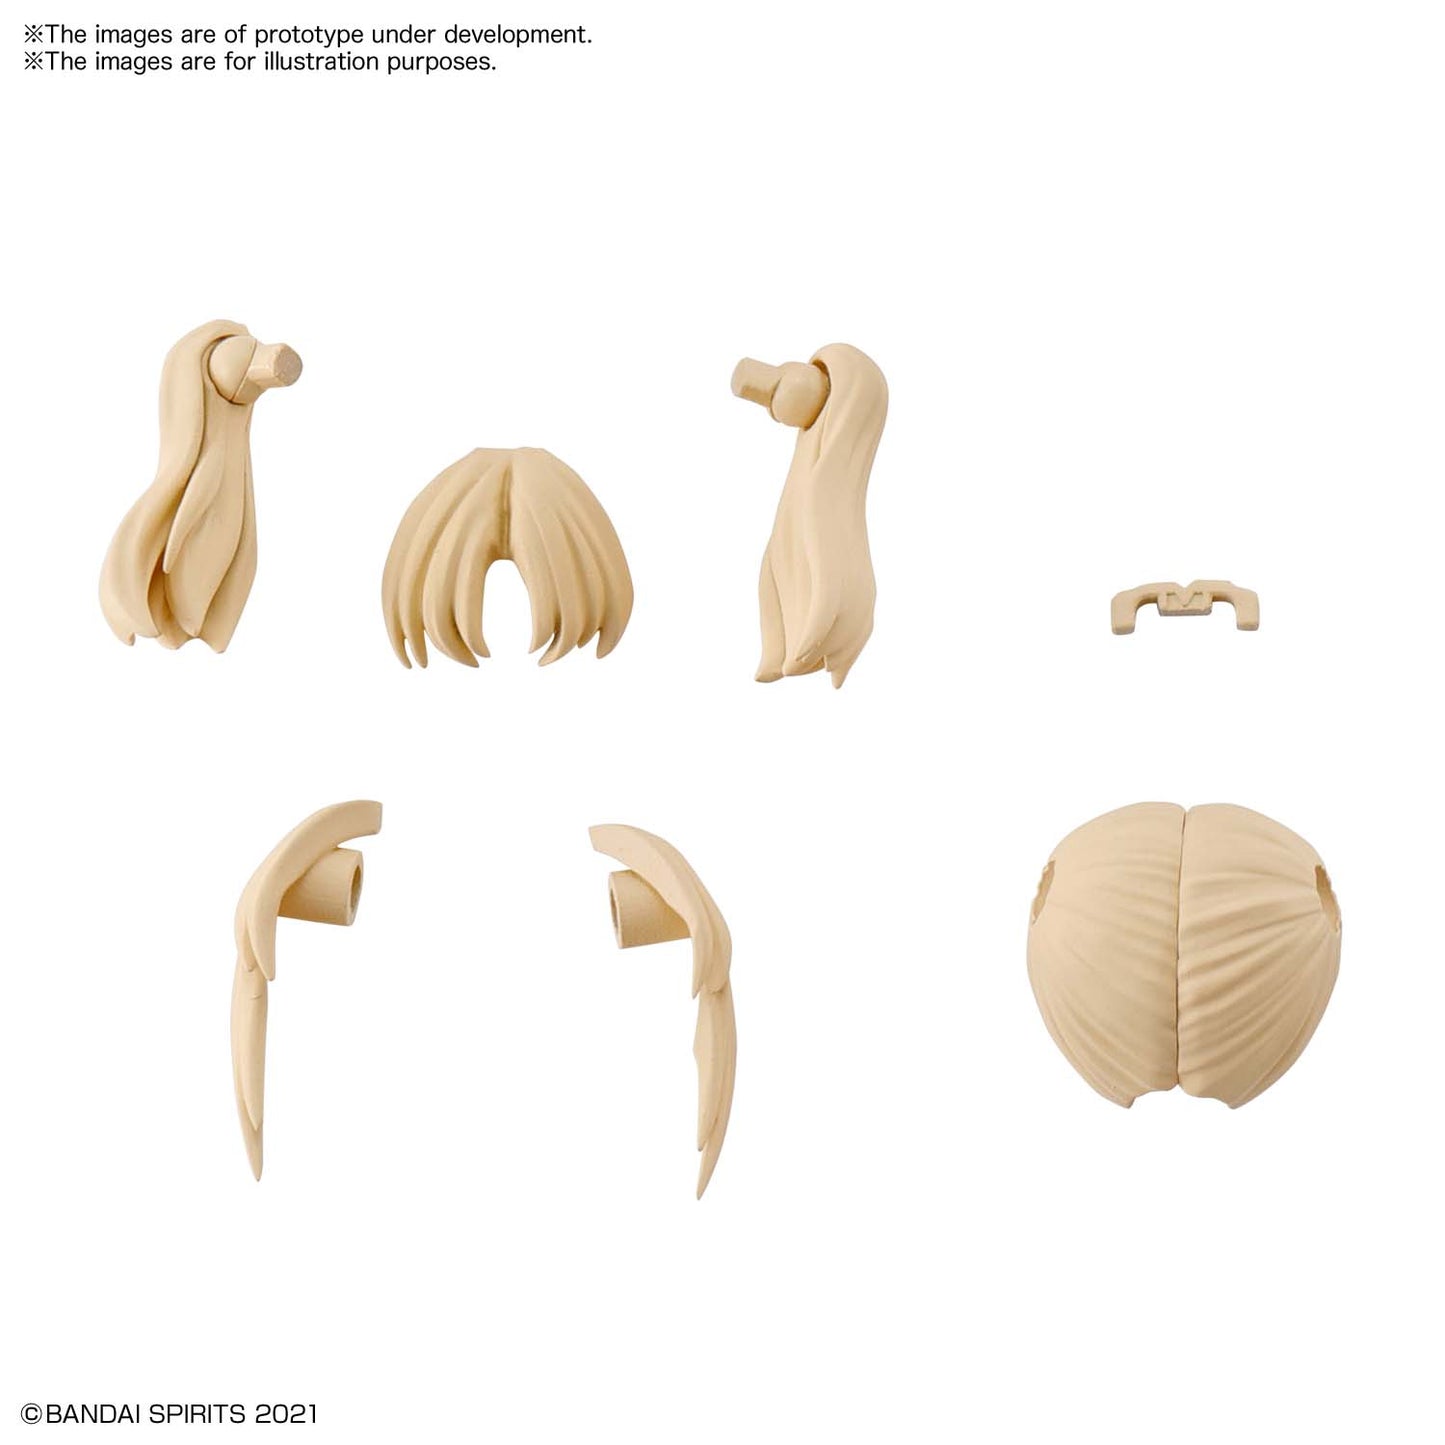 30MS OPTION HAIR STYLE PARTS Vol.1 All 4 TYPES